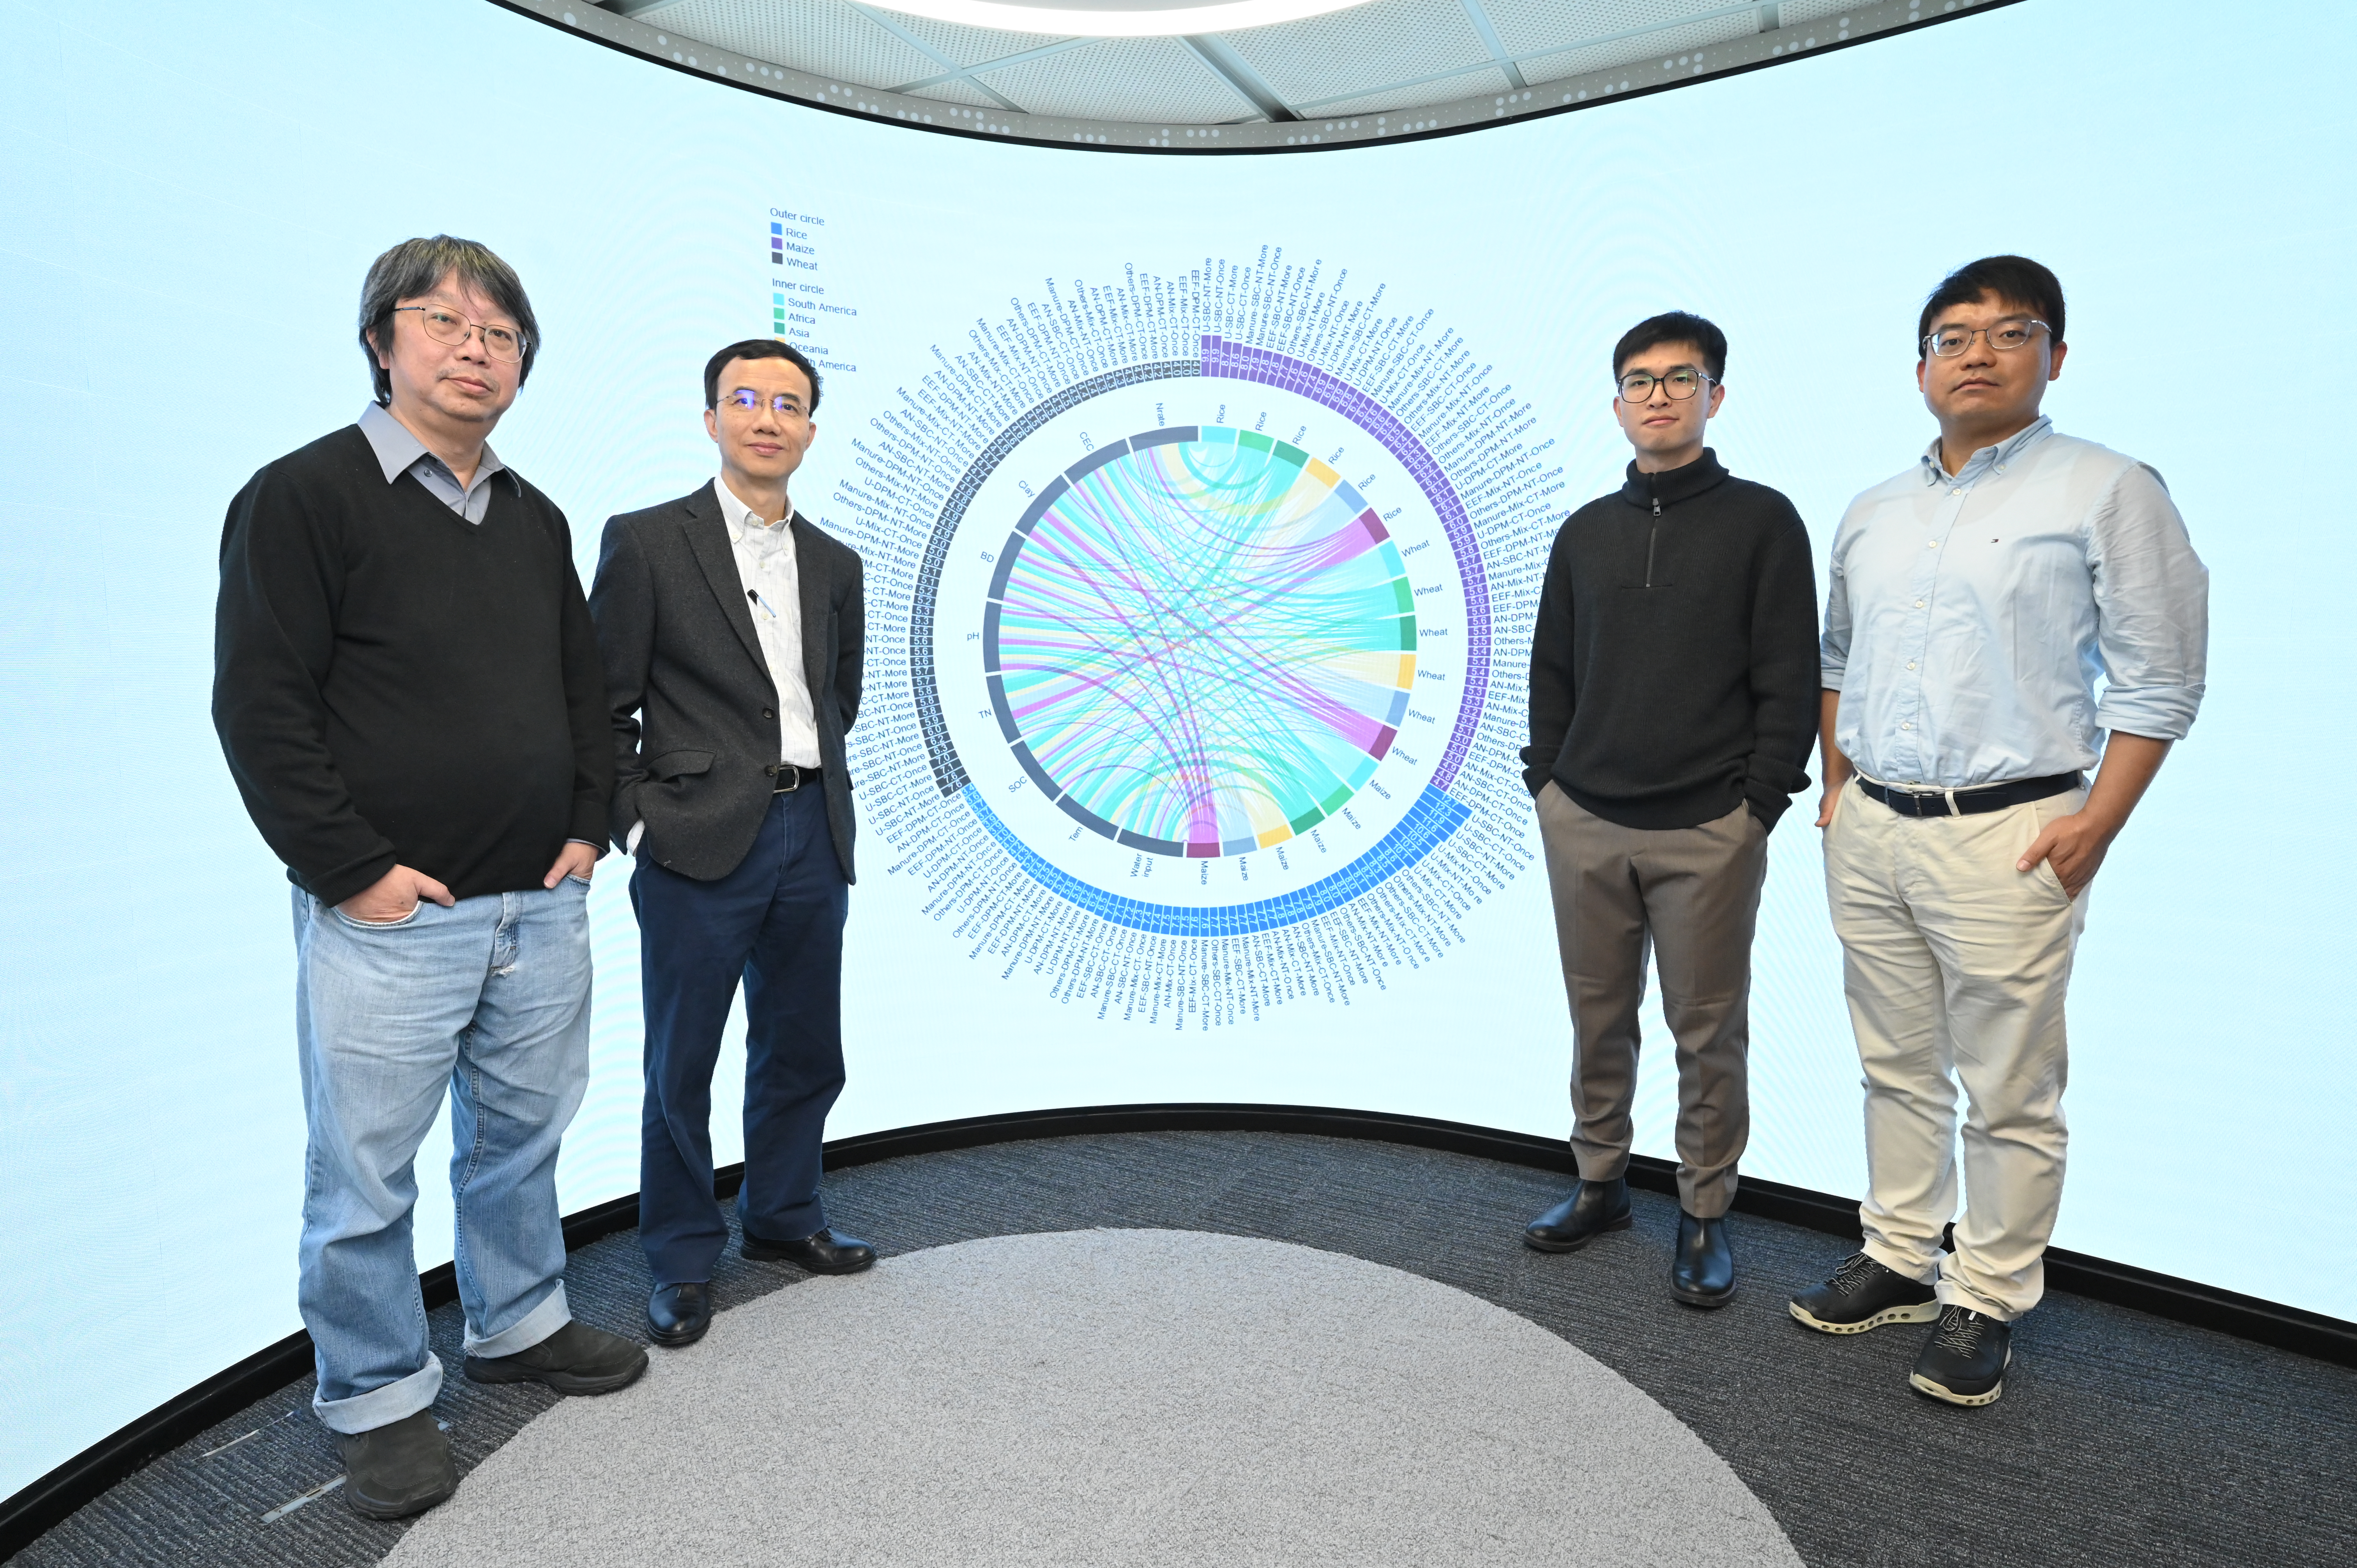 (From left) Prof. Alexis LAU, Head and Chair Professor of the Division of Environment and Sustainability; Prof. Jimmy FUNG, Chair Professor of the Division of Environment and Sustainability in the Academy of Interdisciplinary Studies and Department of Mathematics; Mr. LI Geng, PhD student of the Division of Emerging Interdisciplinary Areas and Dr. ZHANG Xuguo, Research Associate of the Department of Mathematics.  